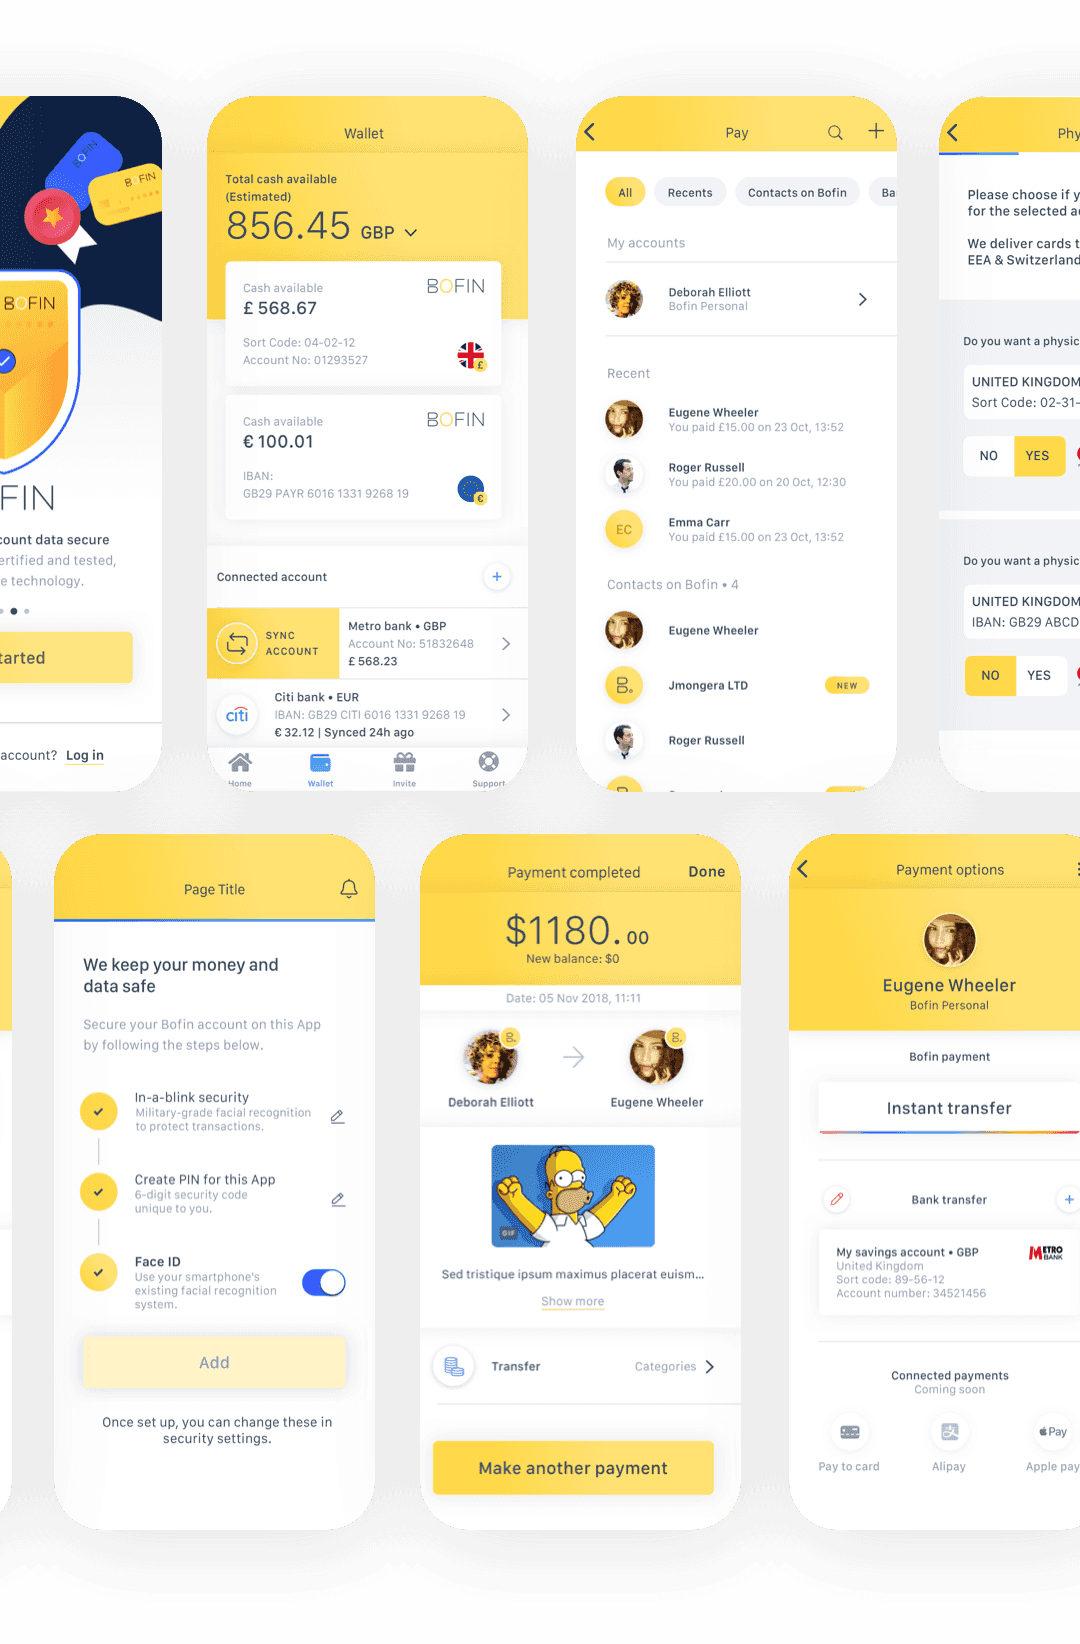 Various screenshots of the visual design for the iOS app.